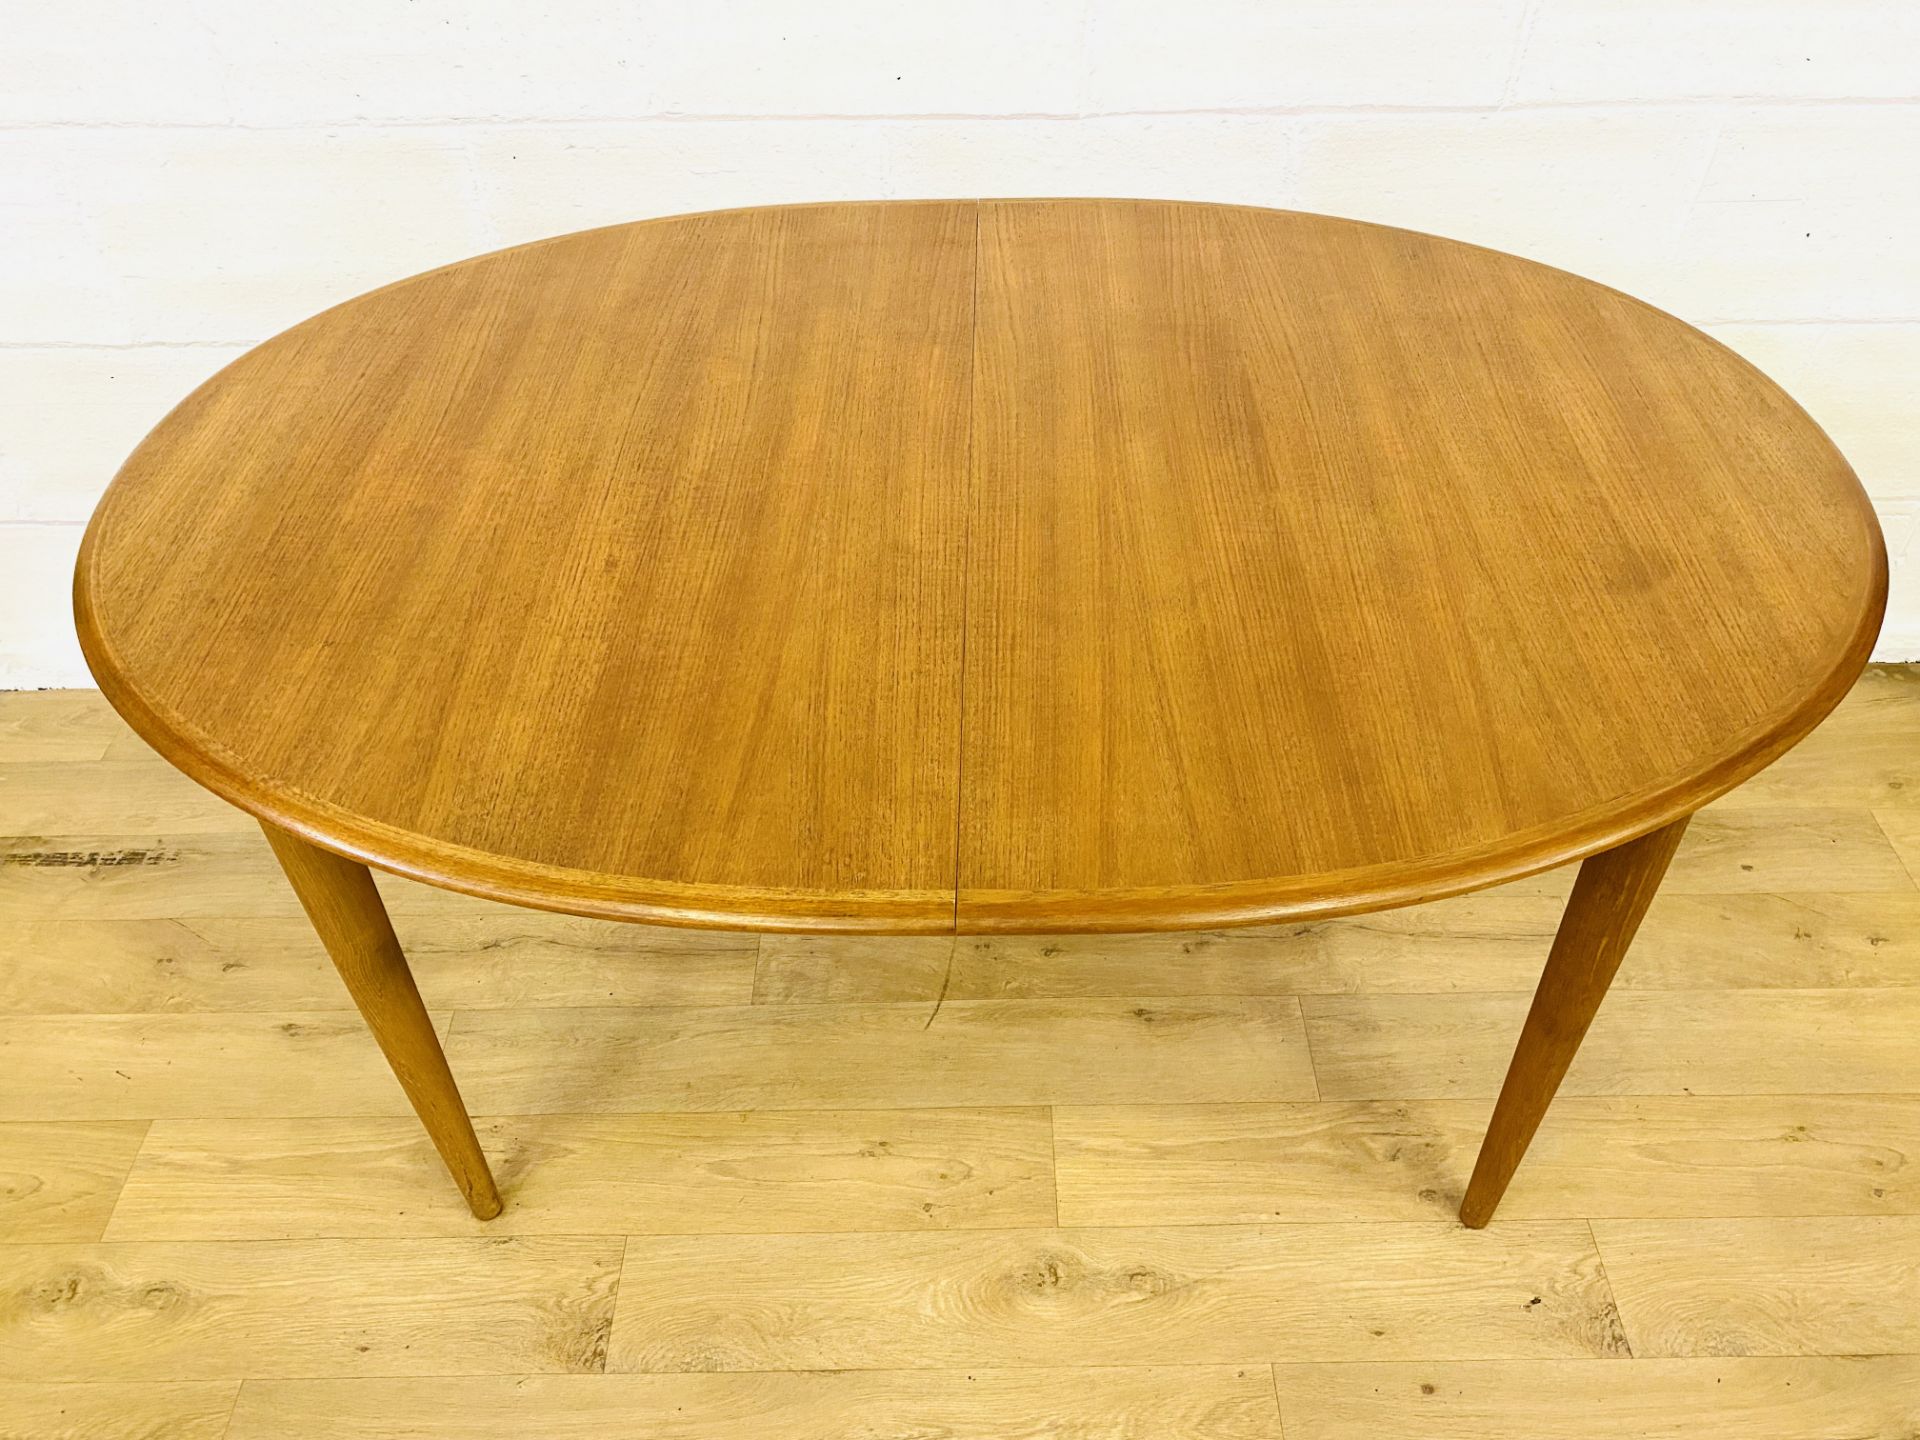 Skovmand and Andersen dining table - Image 2 of 8